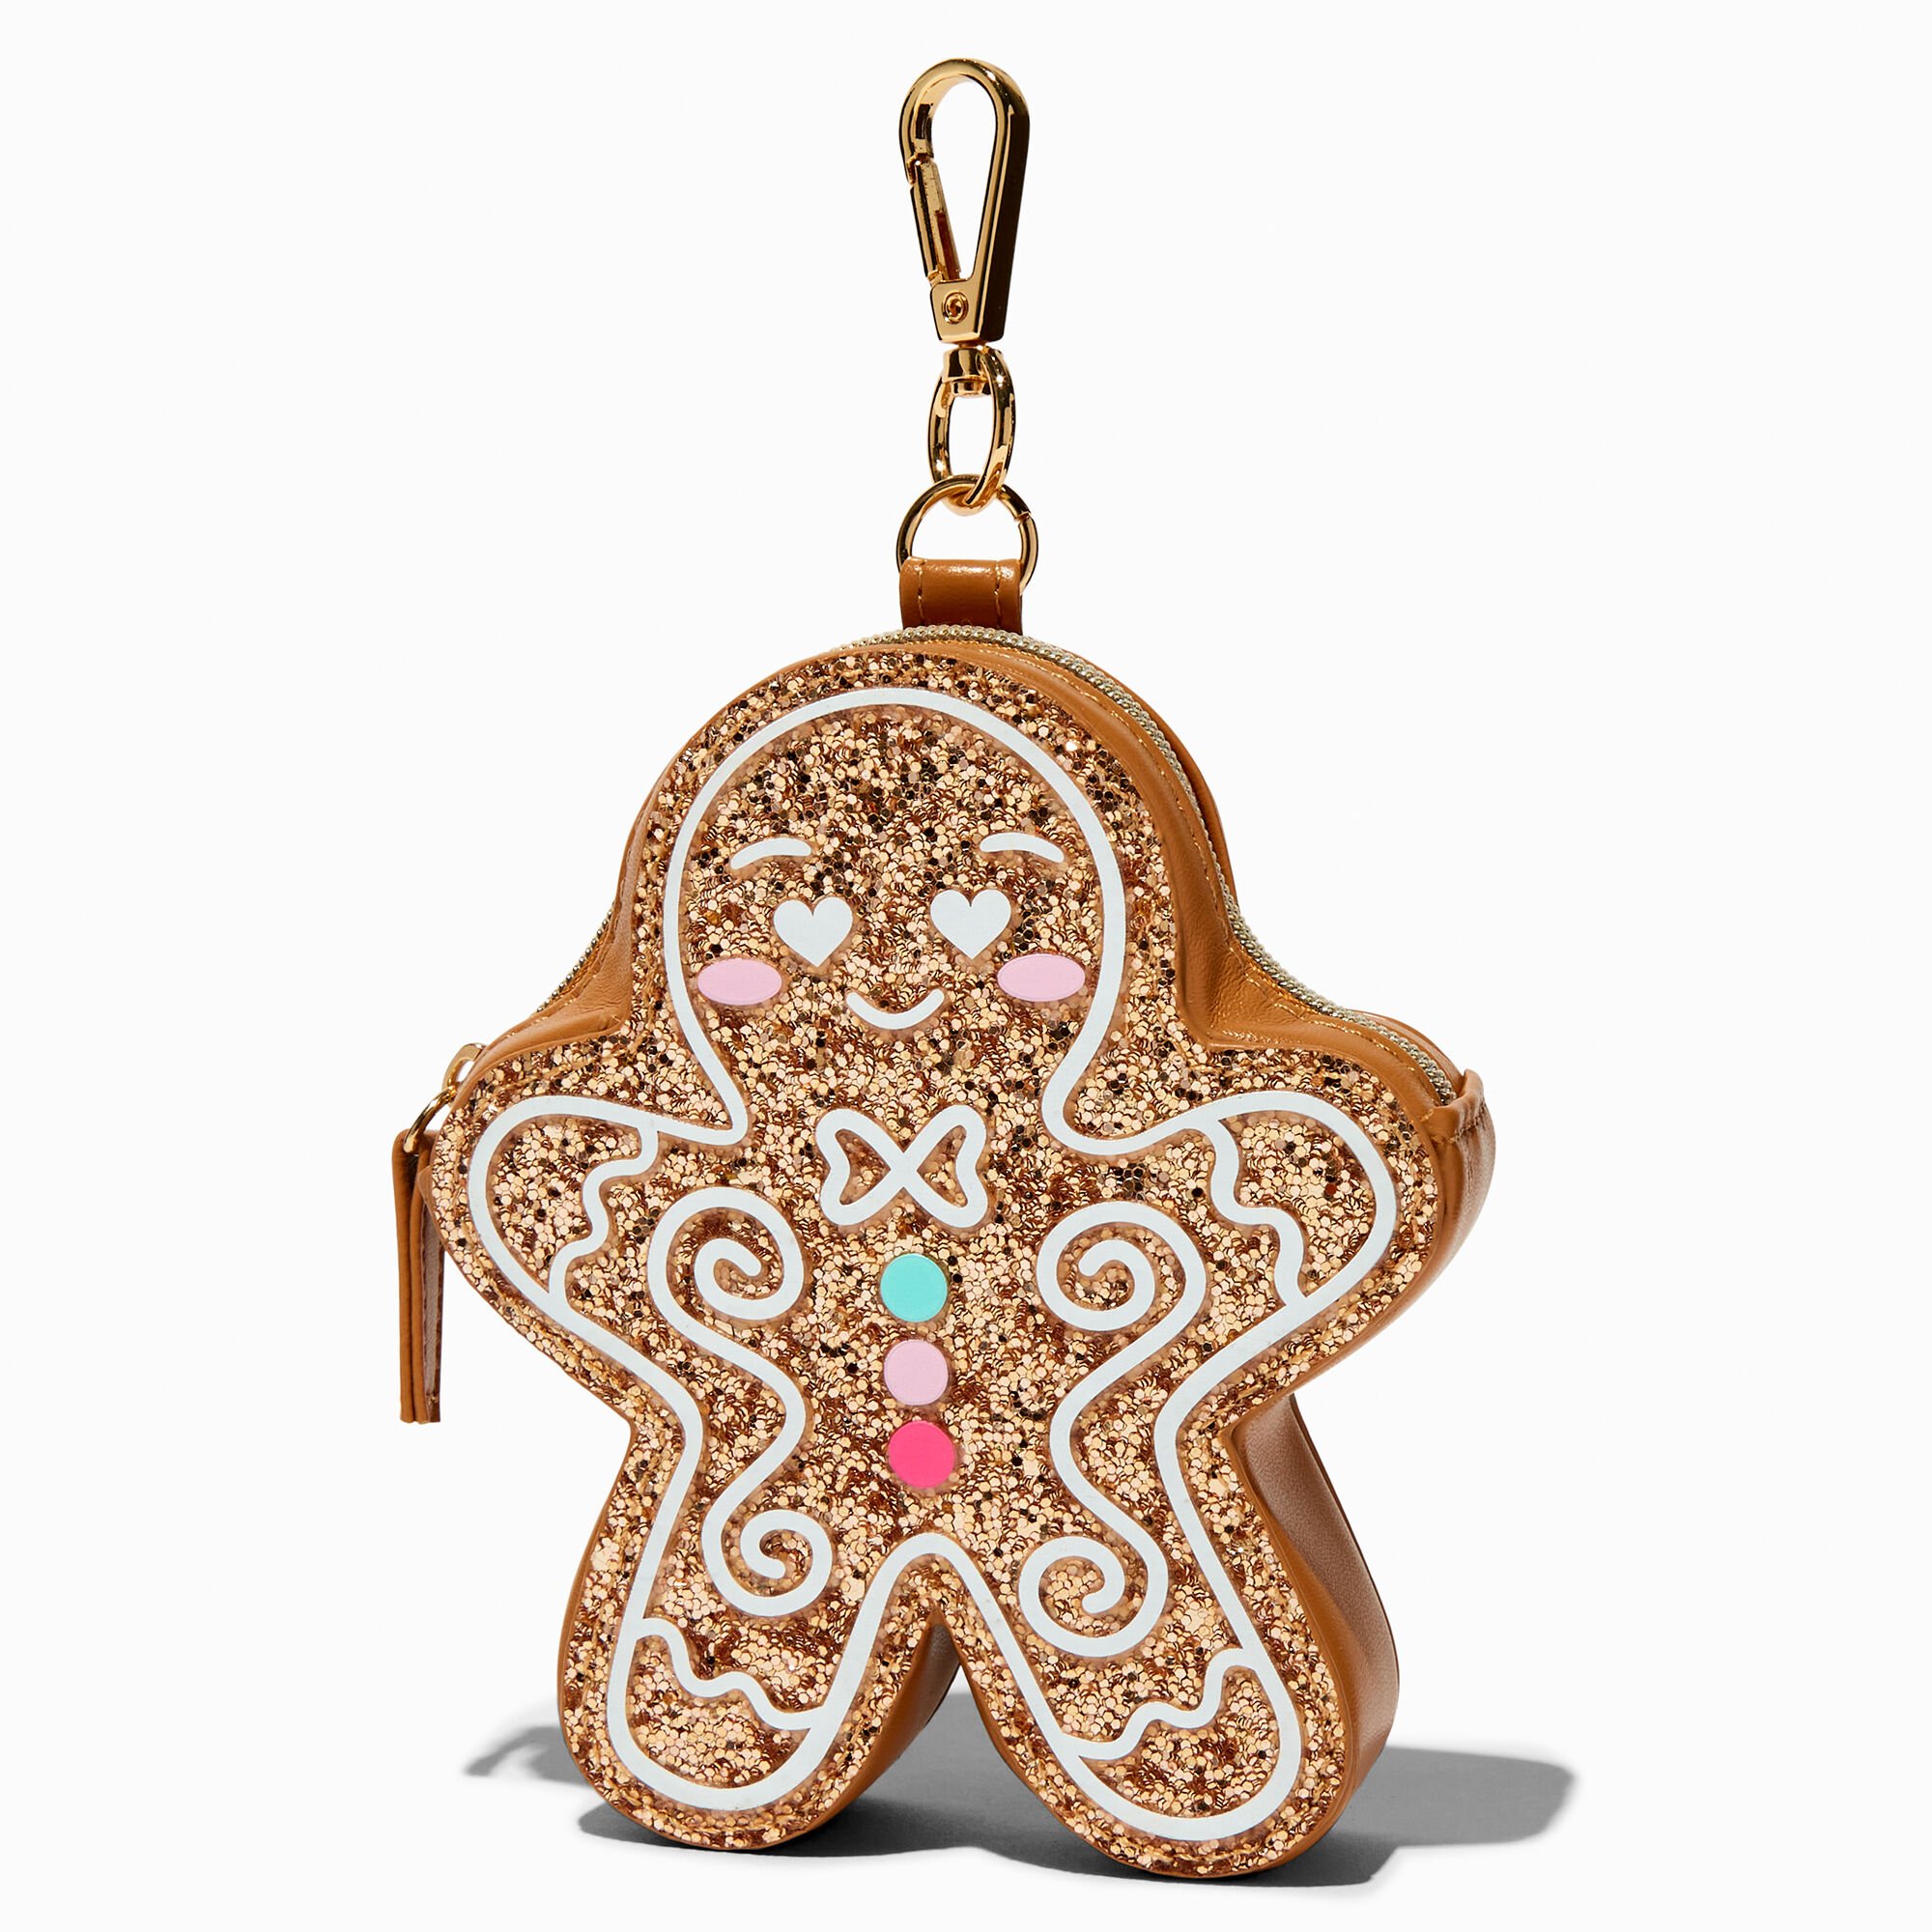 View Claires Glitter Gingerbread Cookie Coin Purse information